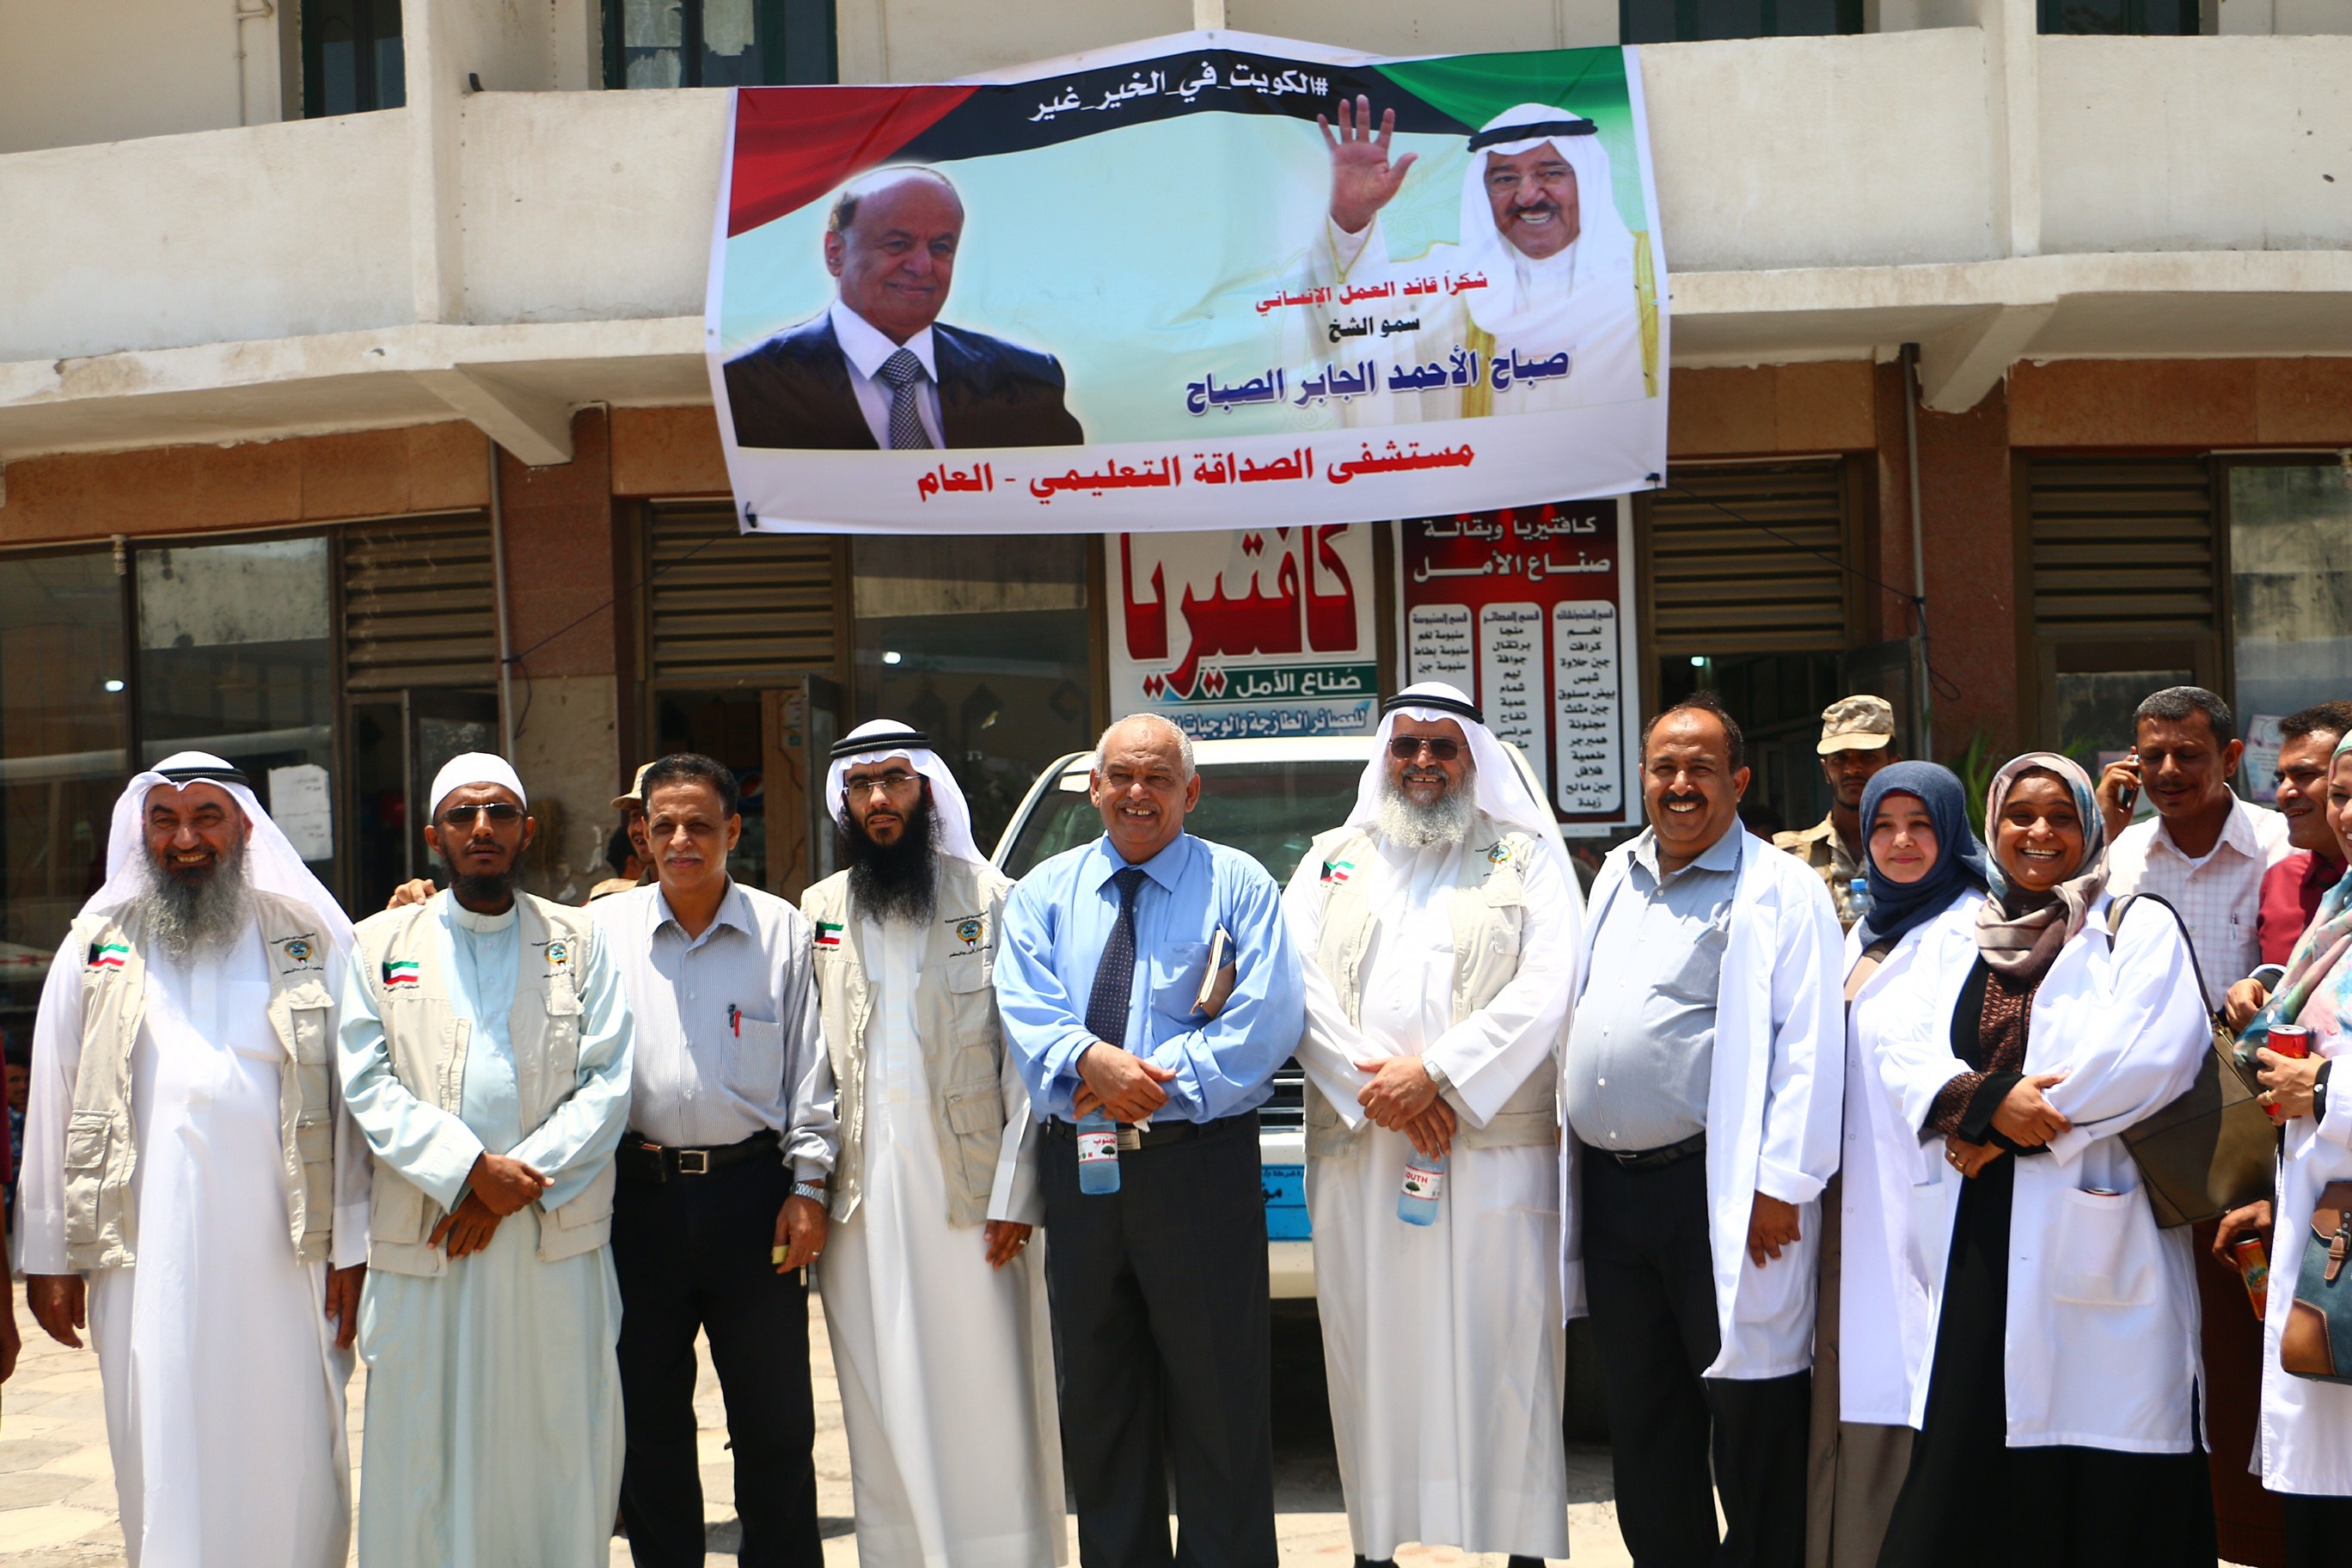 The medical delegation from the medical committee of the Kuwaiti Society for Relief and the Patients Helping Fund Society inspected the health facilities in Aden governorate